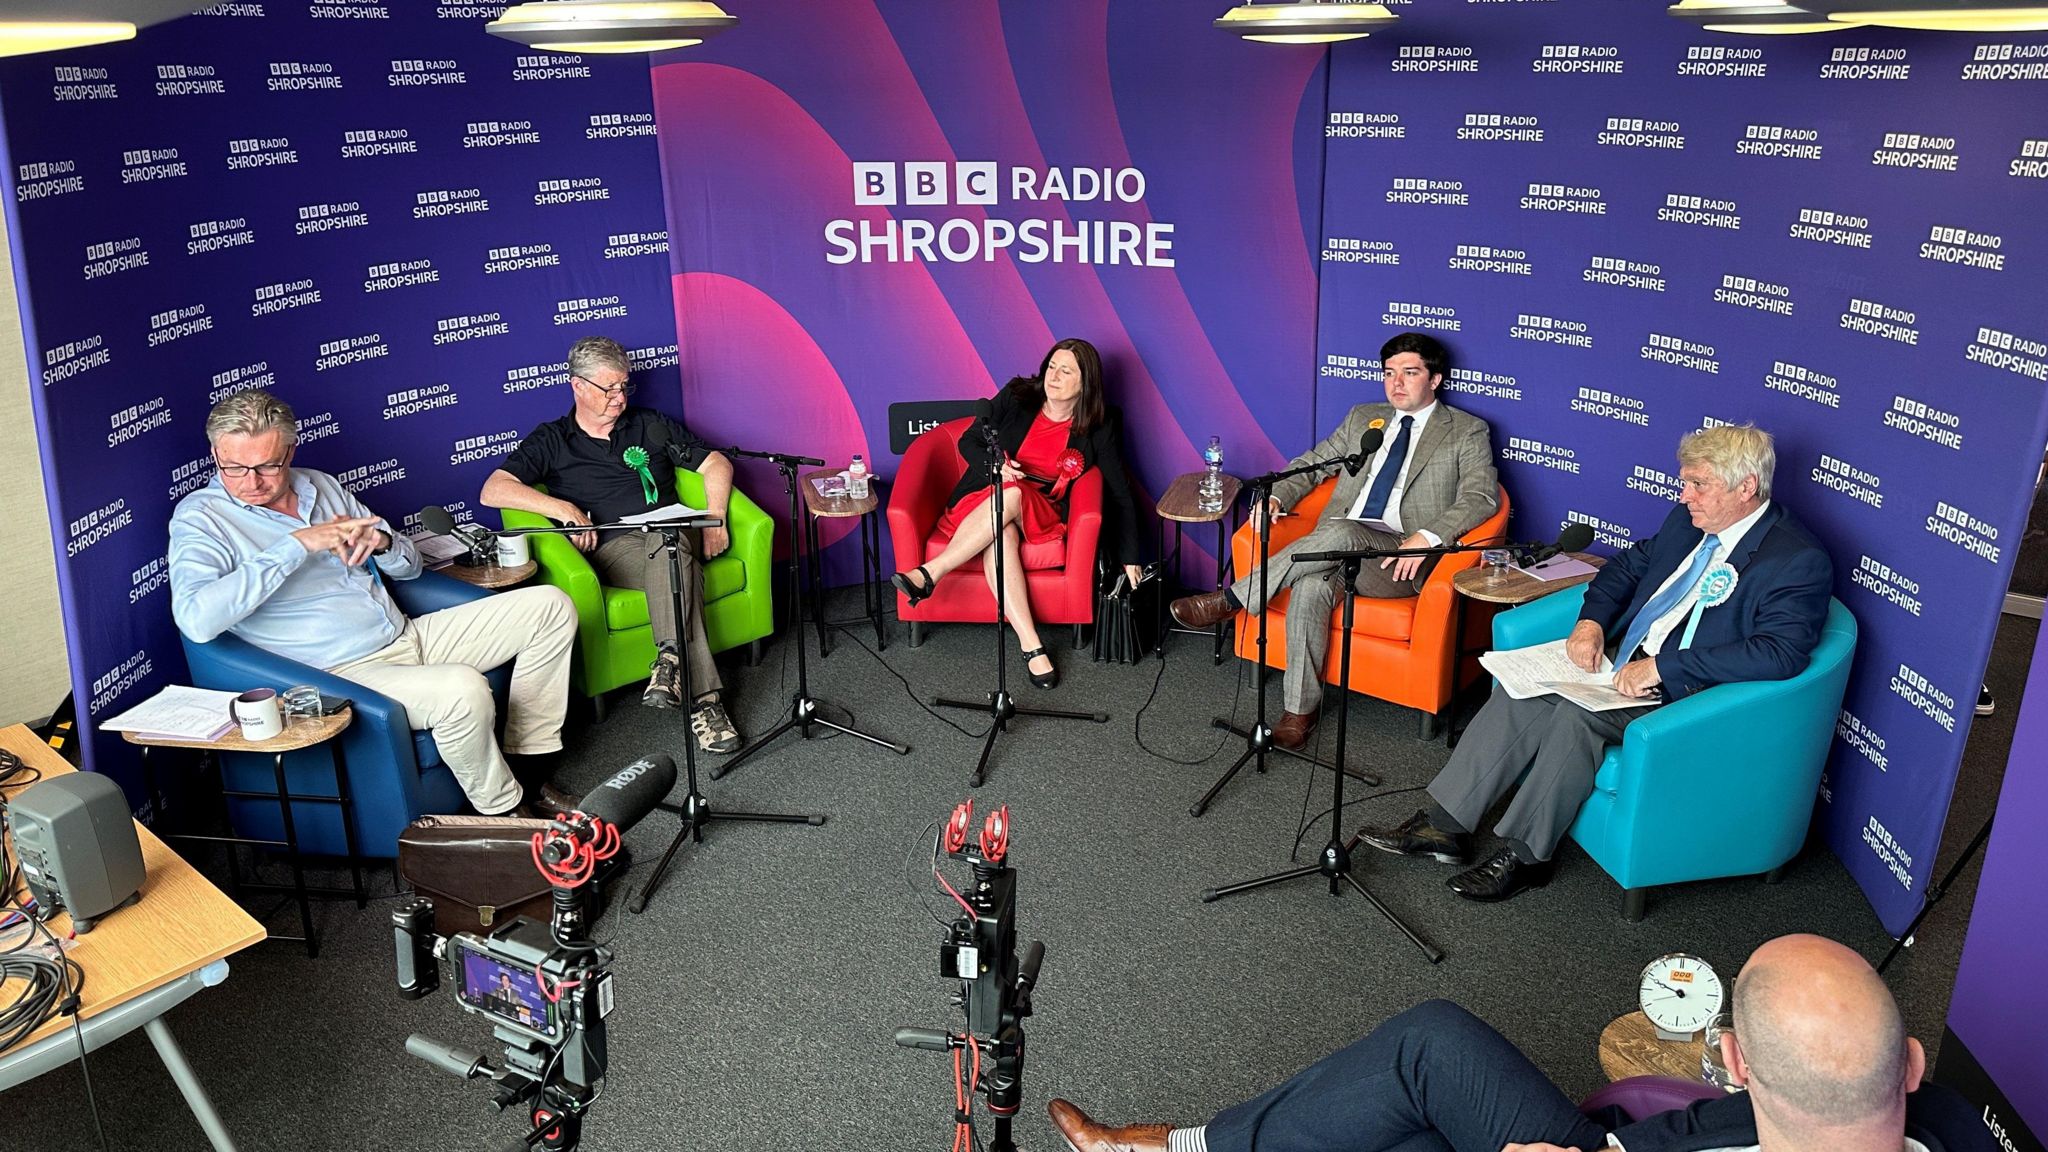 The five Shrewsbury election candidates sitting in chairs in front of cameras and a presenter